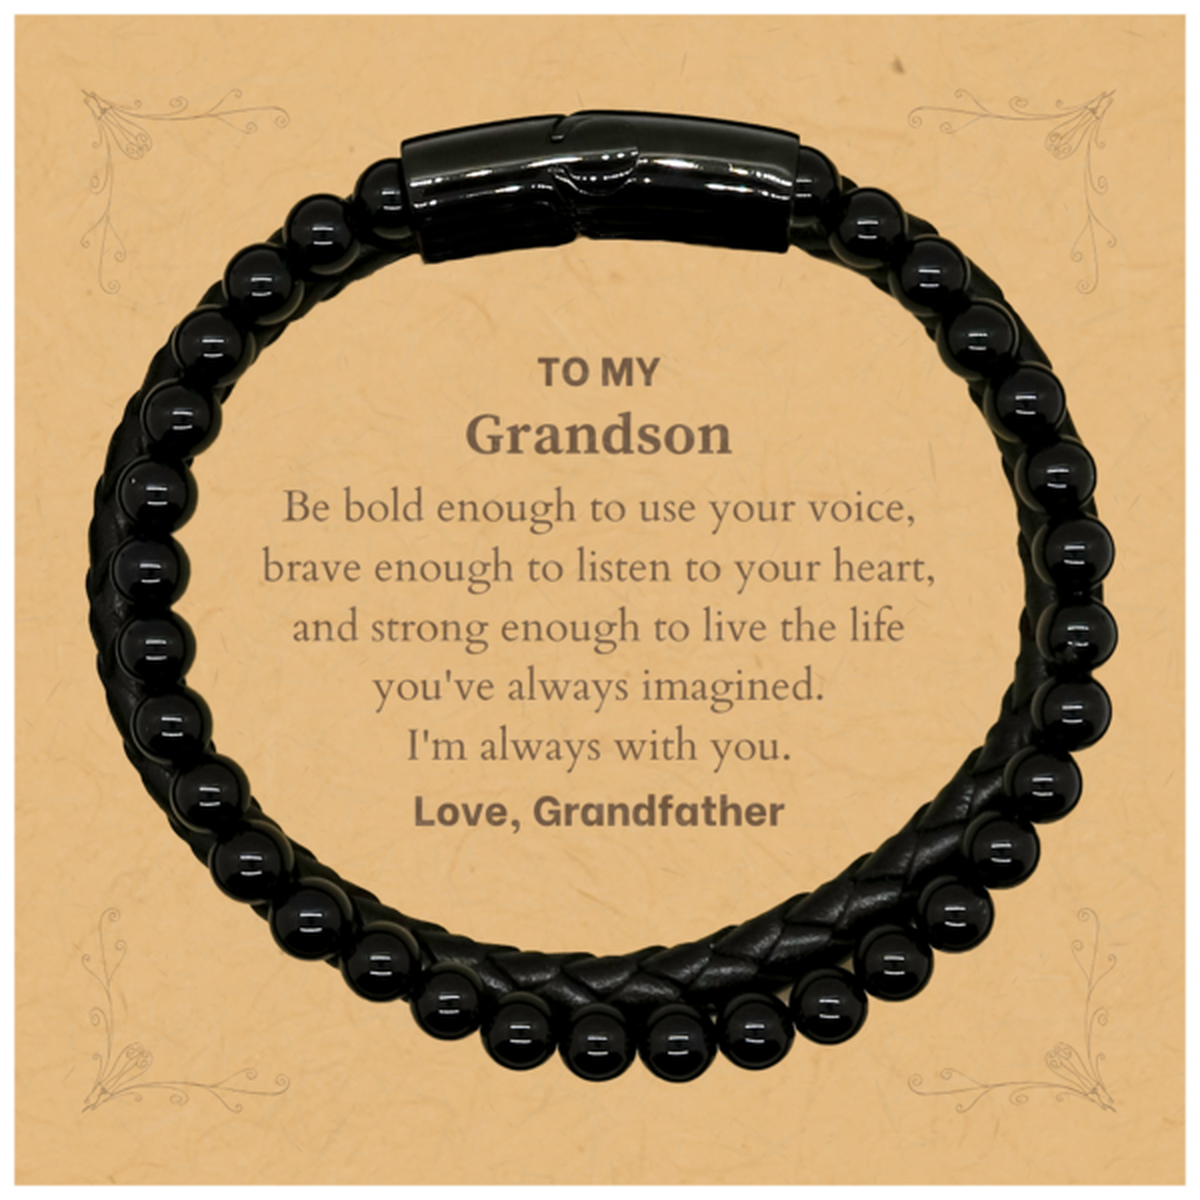 Keepsake Grandson Stone Leather Bracelets Gift Idea Graduation Christmas Birthday Grandson from Grandfather, Grandson Be bold enough to use your voice, brave enough to listen to your heart. Love, Grandfather